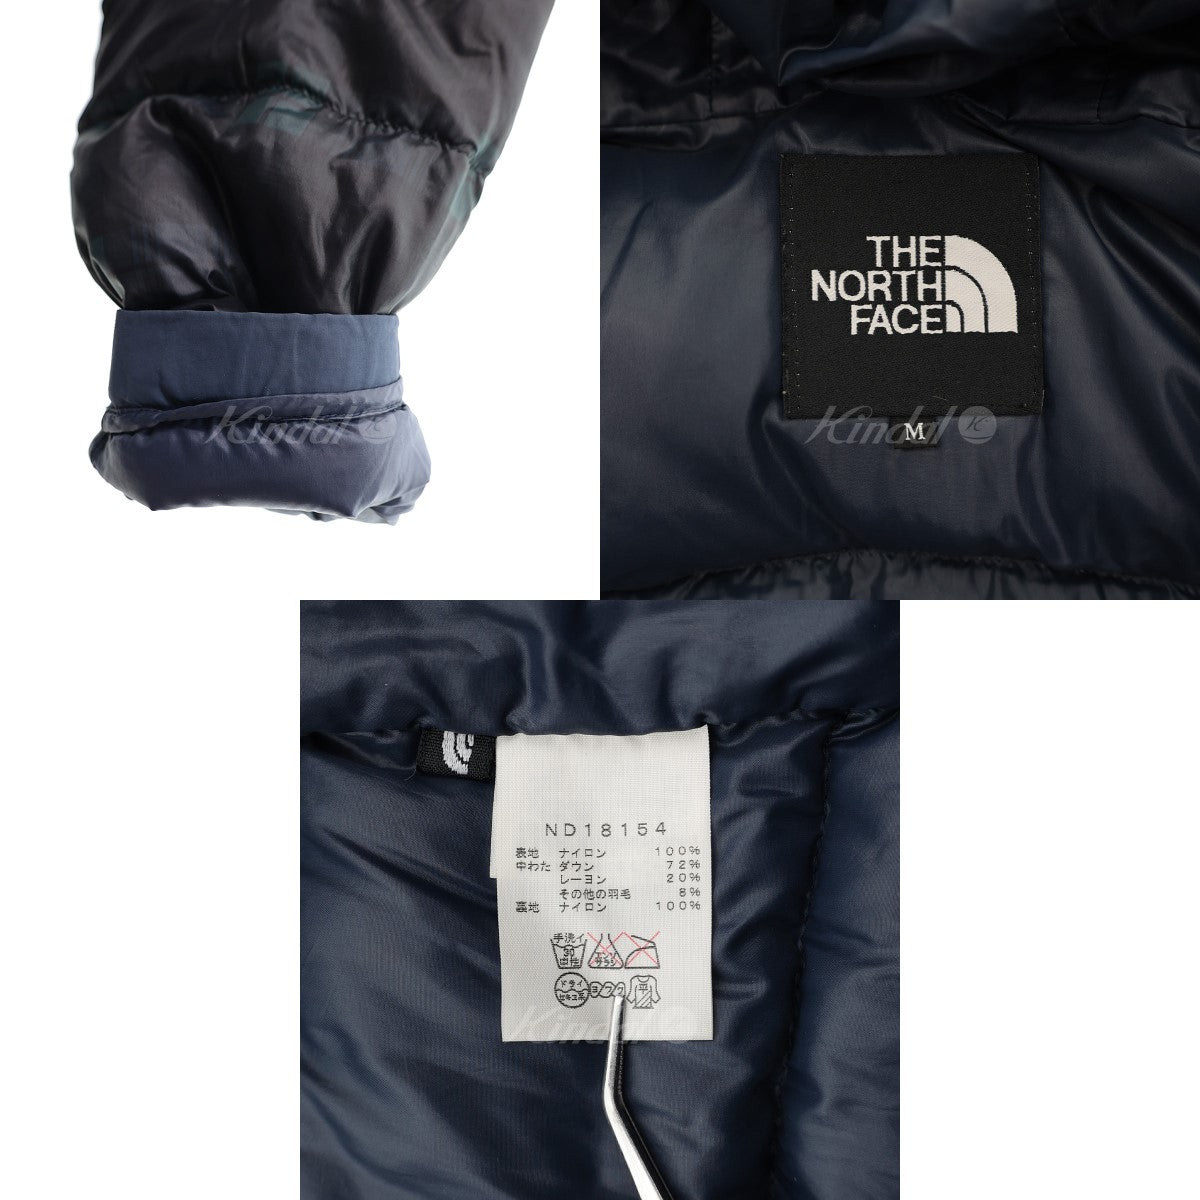 THE NORTH FACE(ザノースフェイス) チェック柄ダウンジャケット　NOVELTY ACONCAGUA HOODIE　ND18154